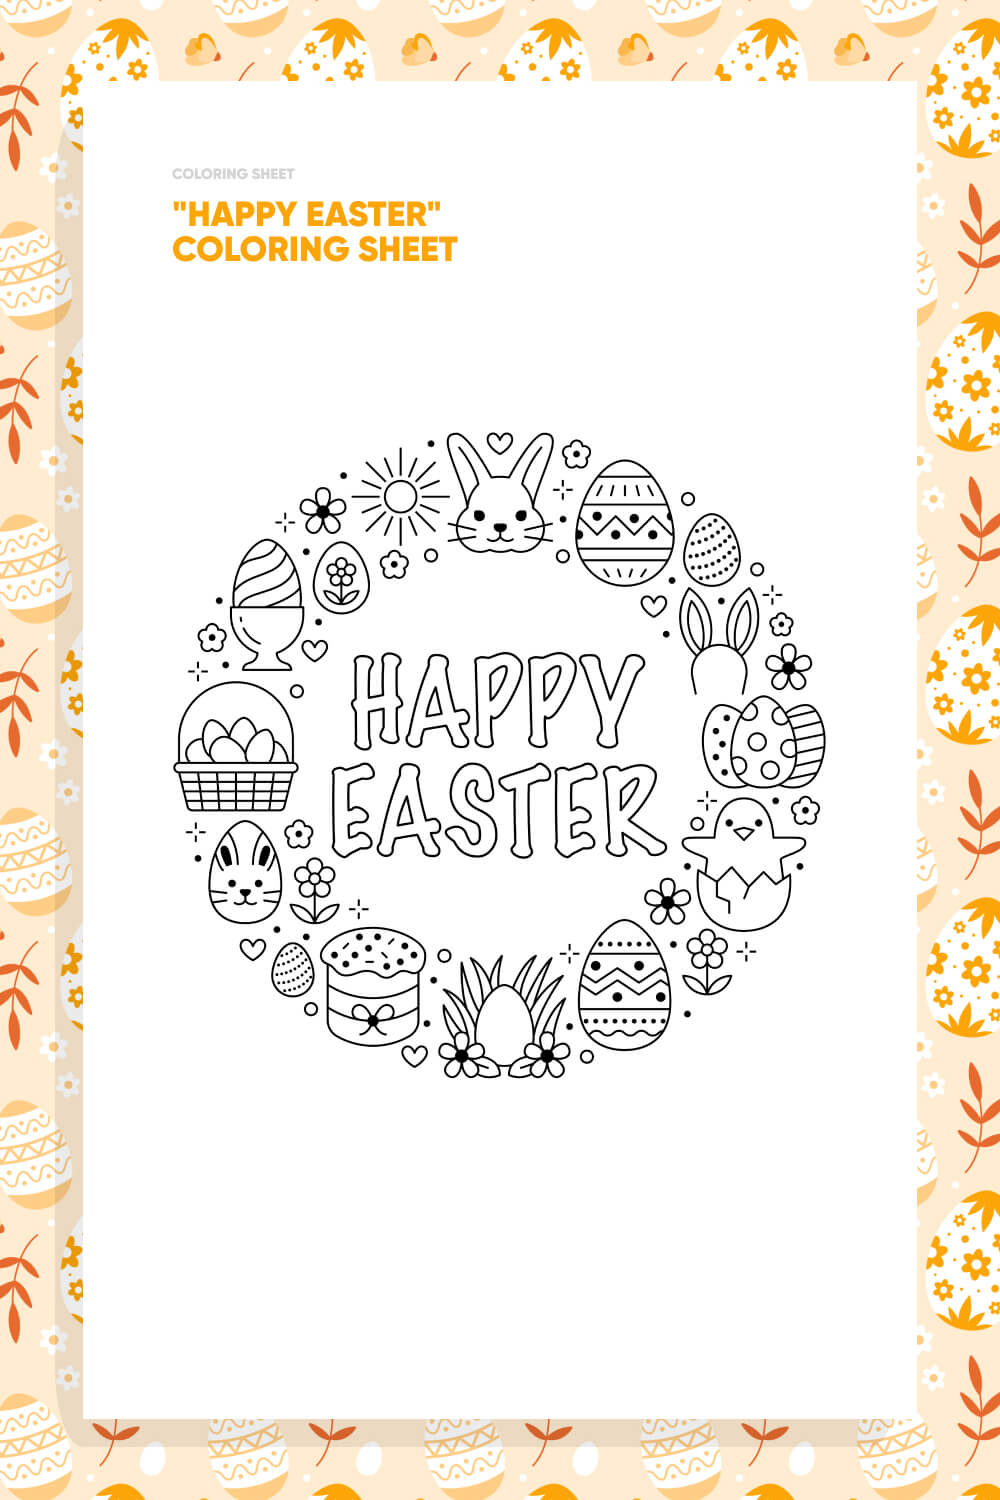 "Happy Easter" Coloring Sheet pinterest.